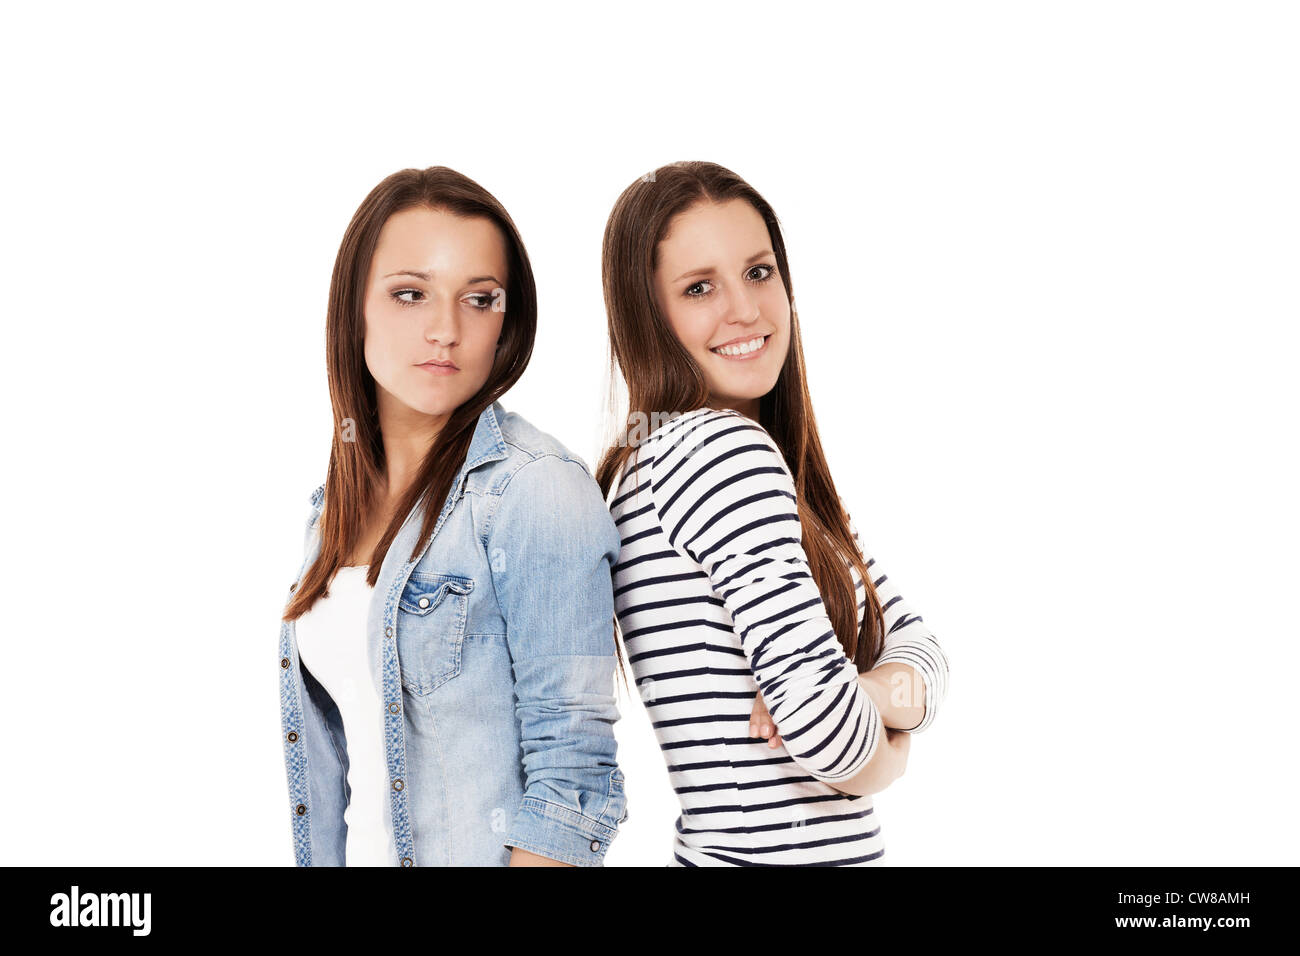 one happy and one upset teenager standig back to back on white background Stock Photo